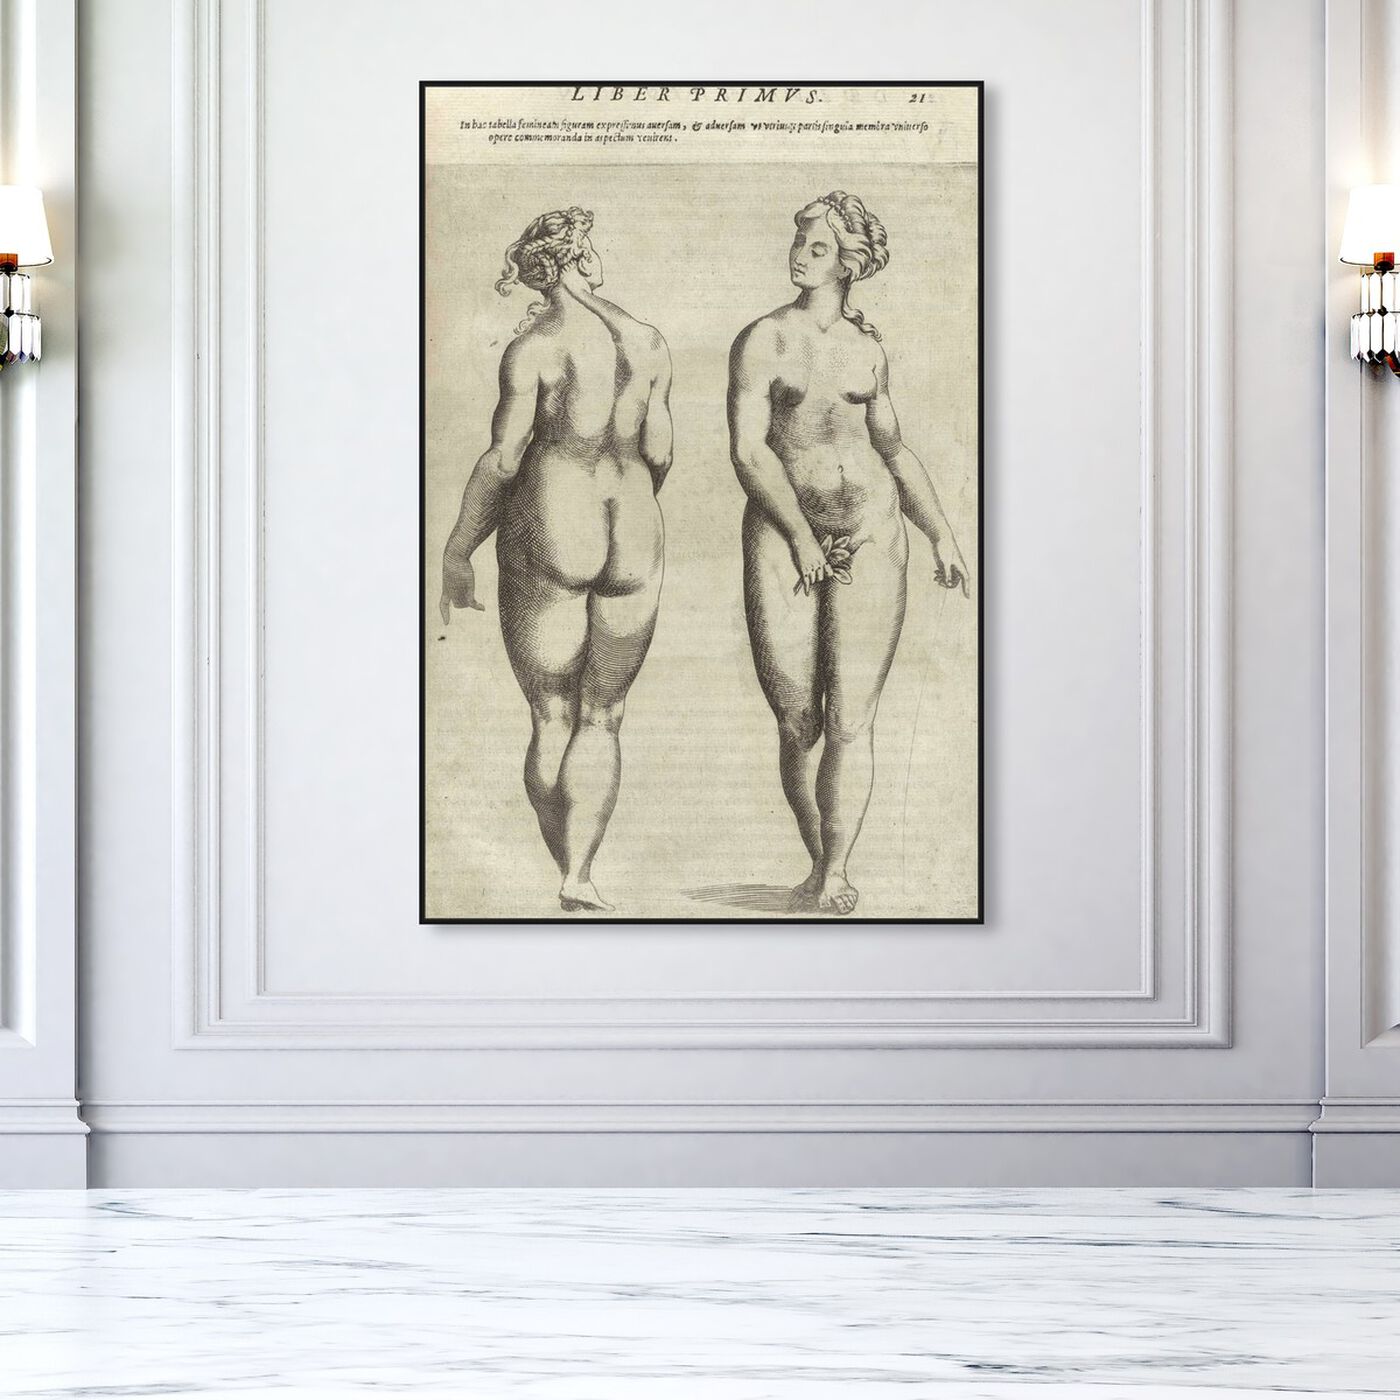 Hanging view of Liber Primvs - The Art Cabinet featuring classic and figurative and nudes art.